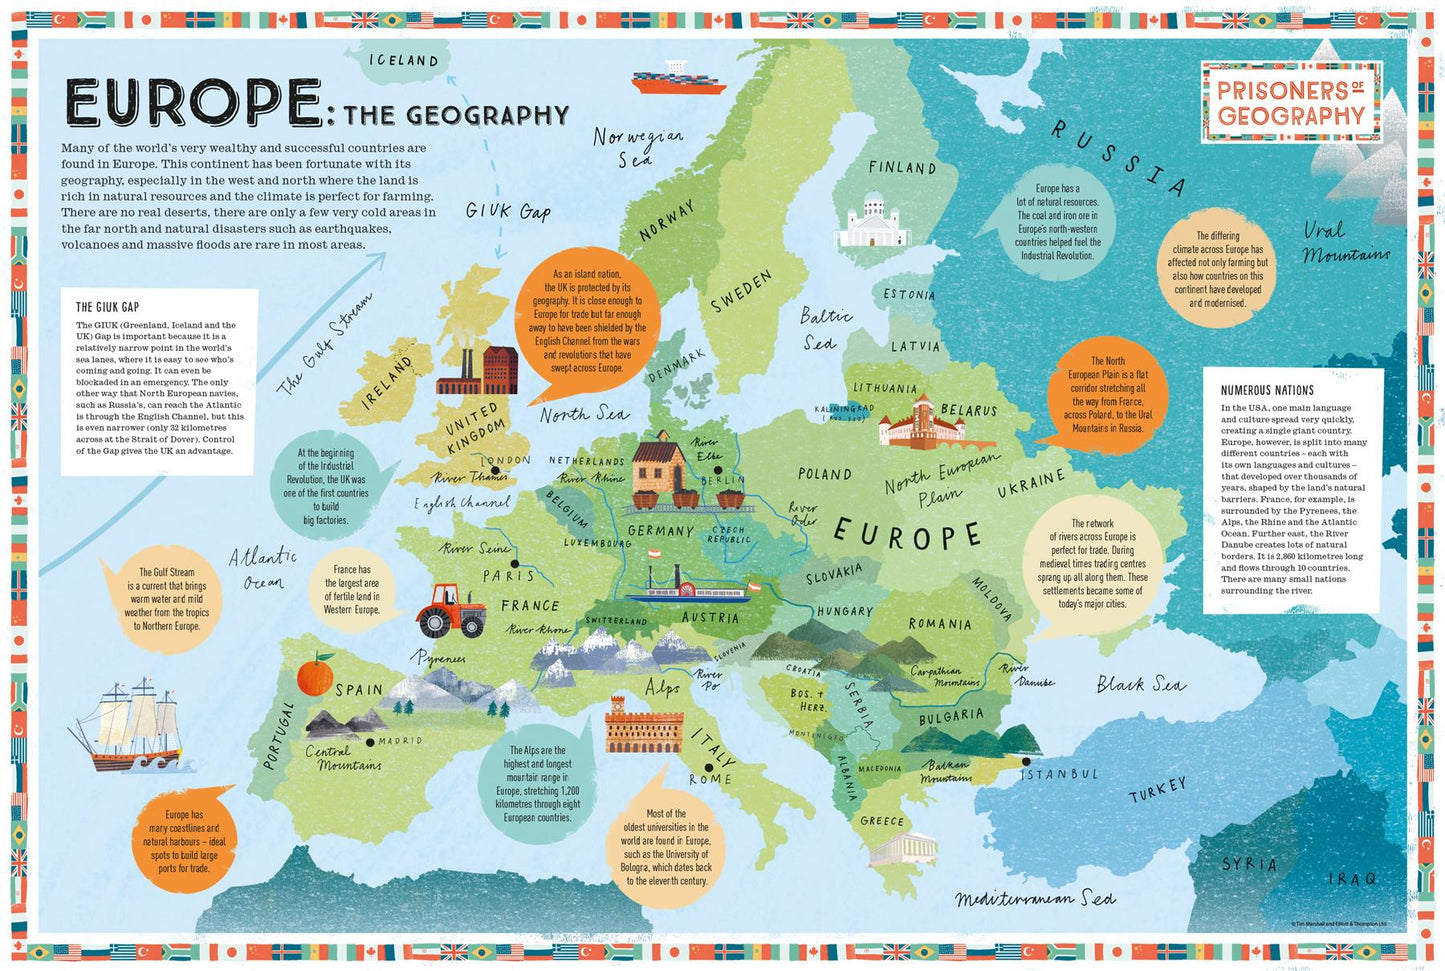 Europe Educational Wall Map - Prisoners of Geography